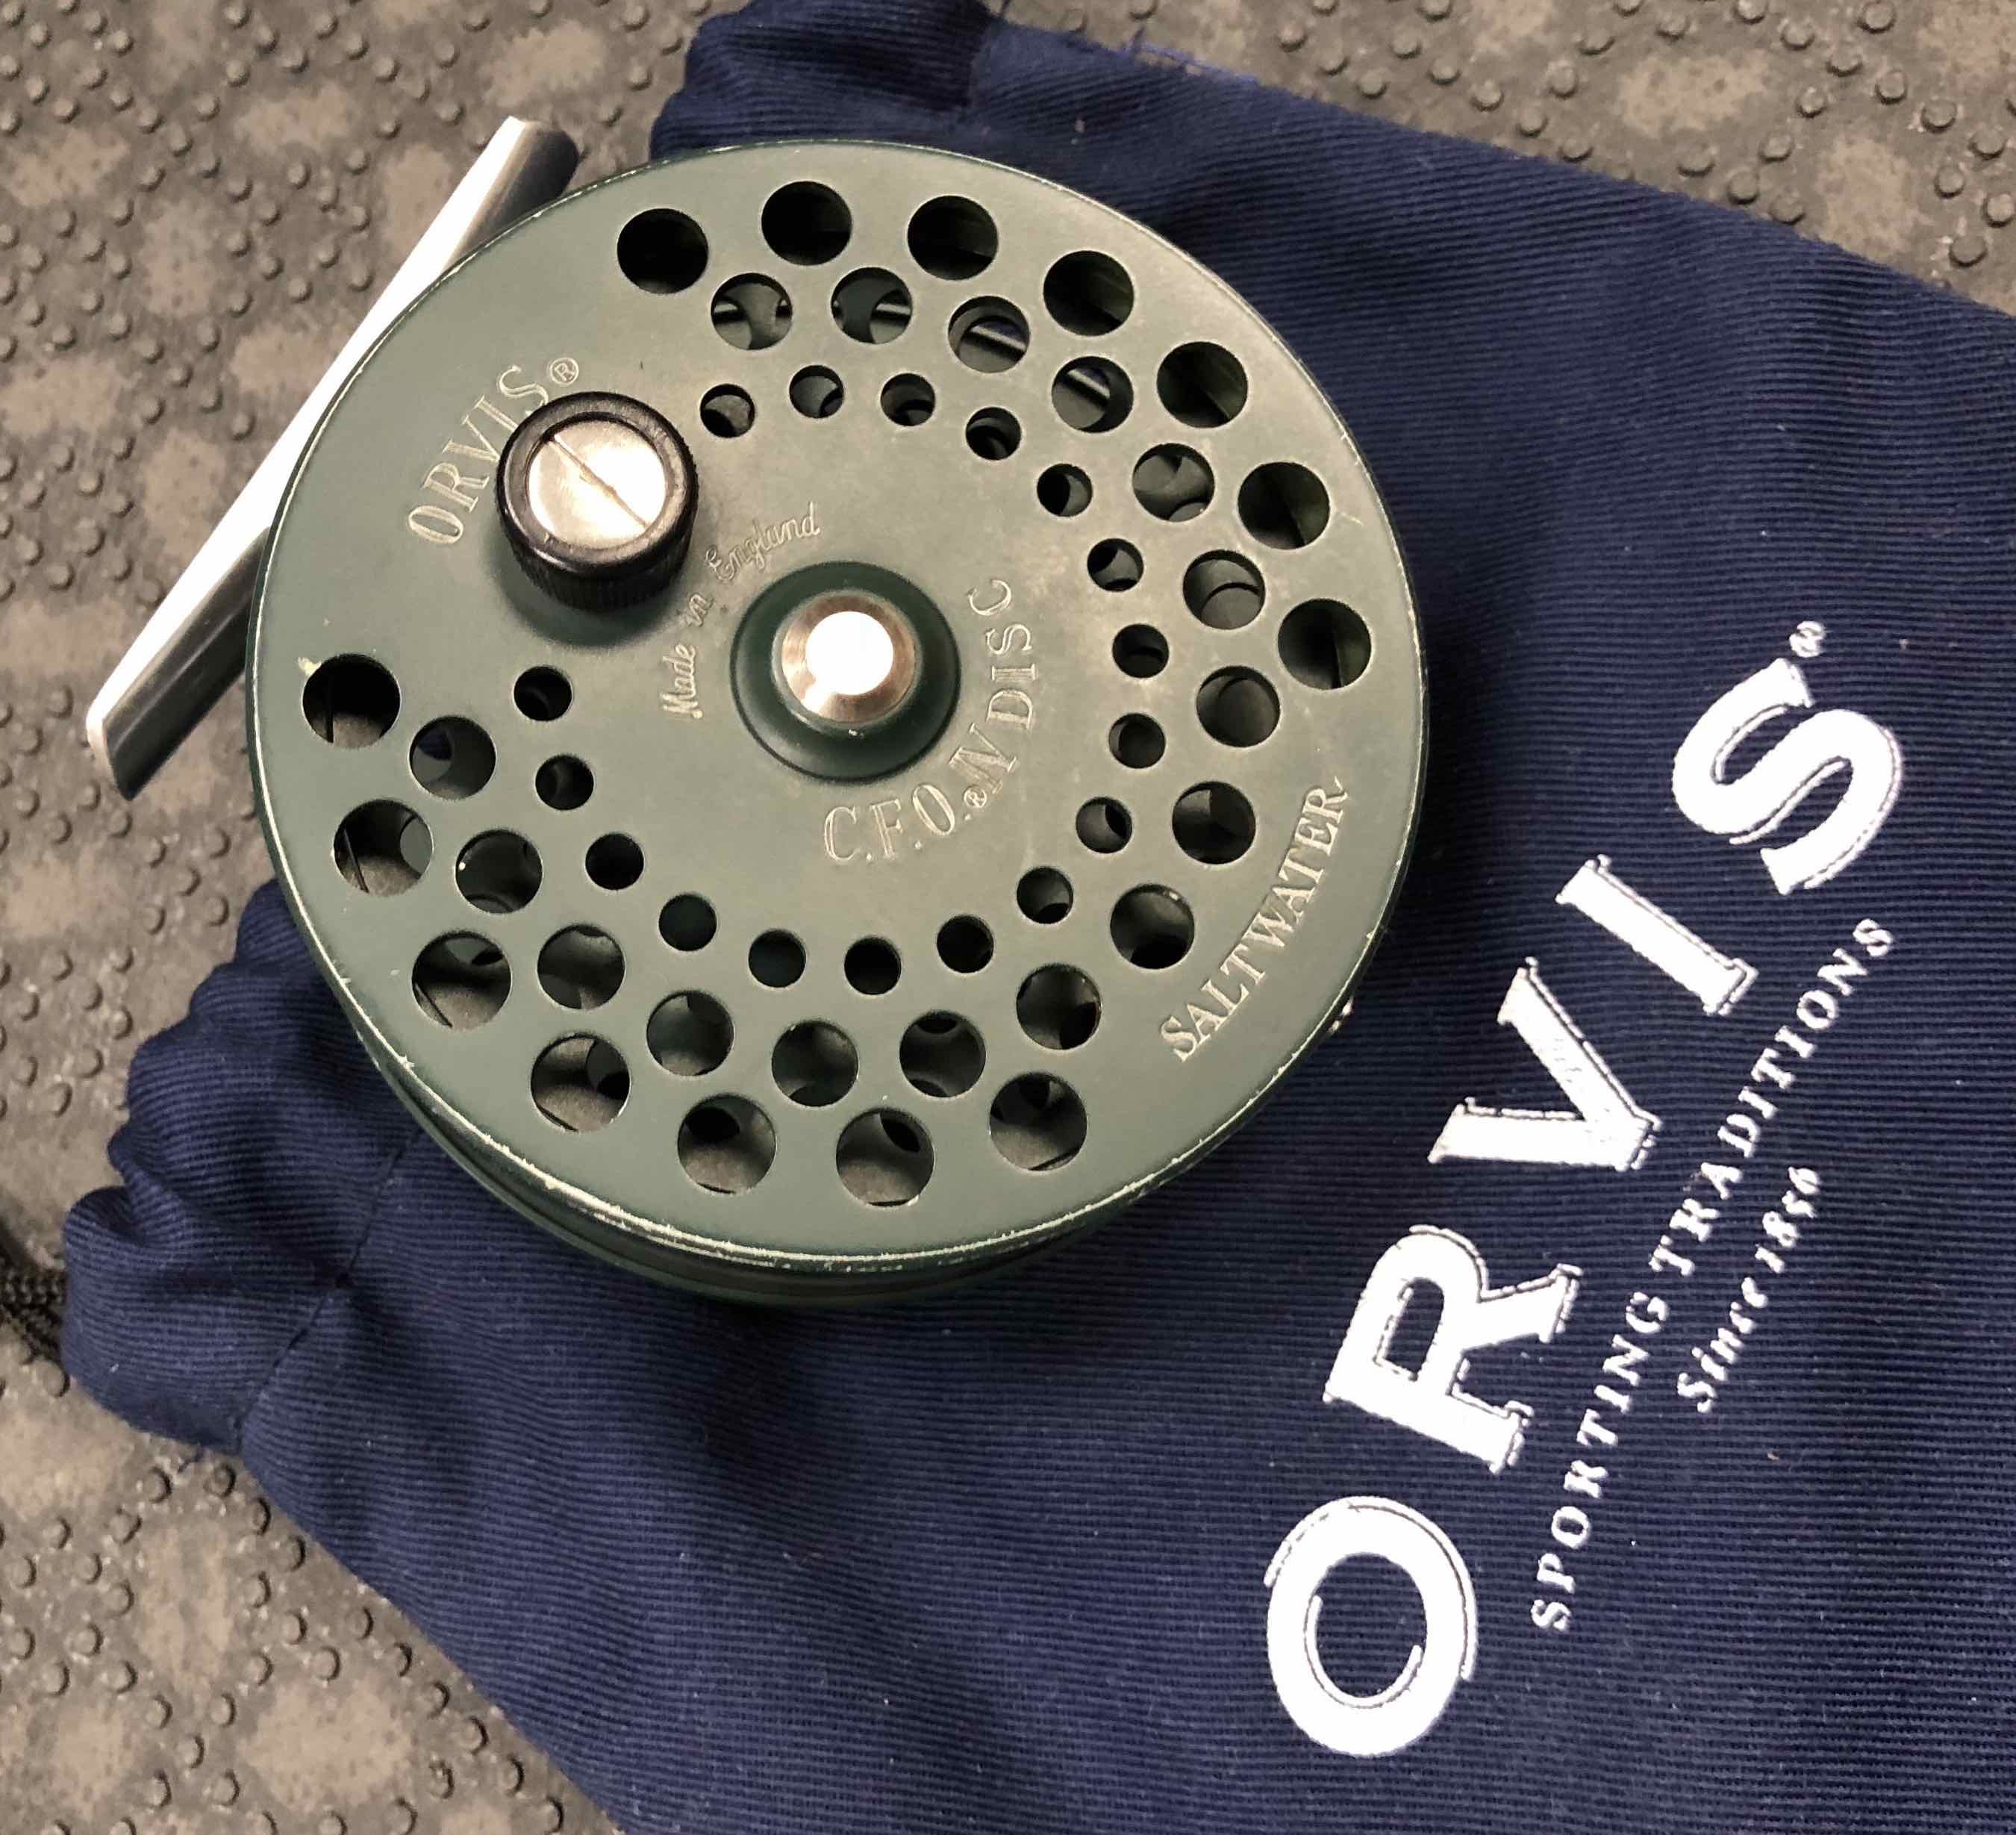 SOLD! – Orvis CFO IV Disc Saltwater Fly Reel – Made in England